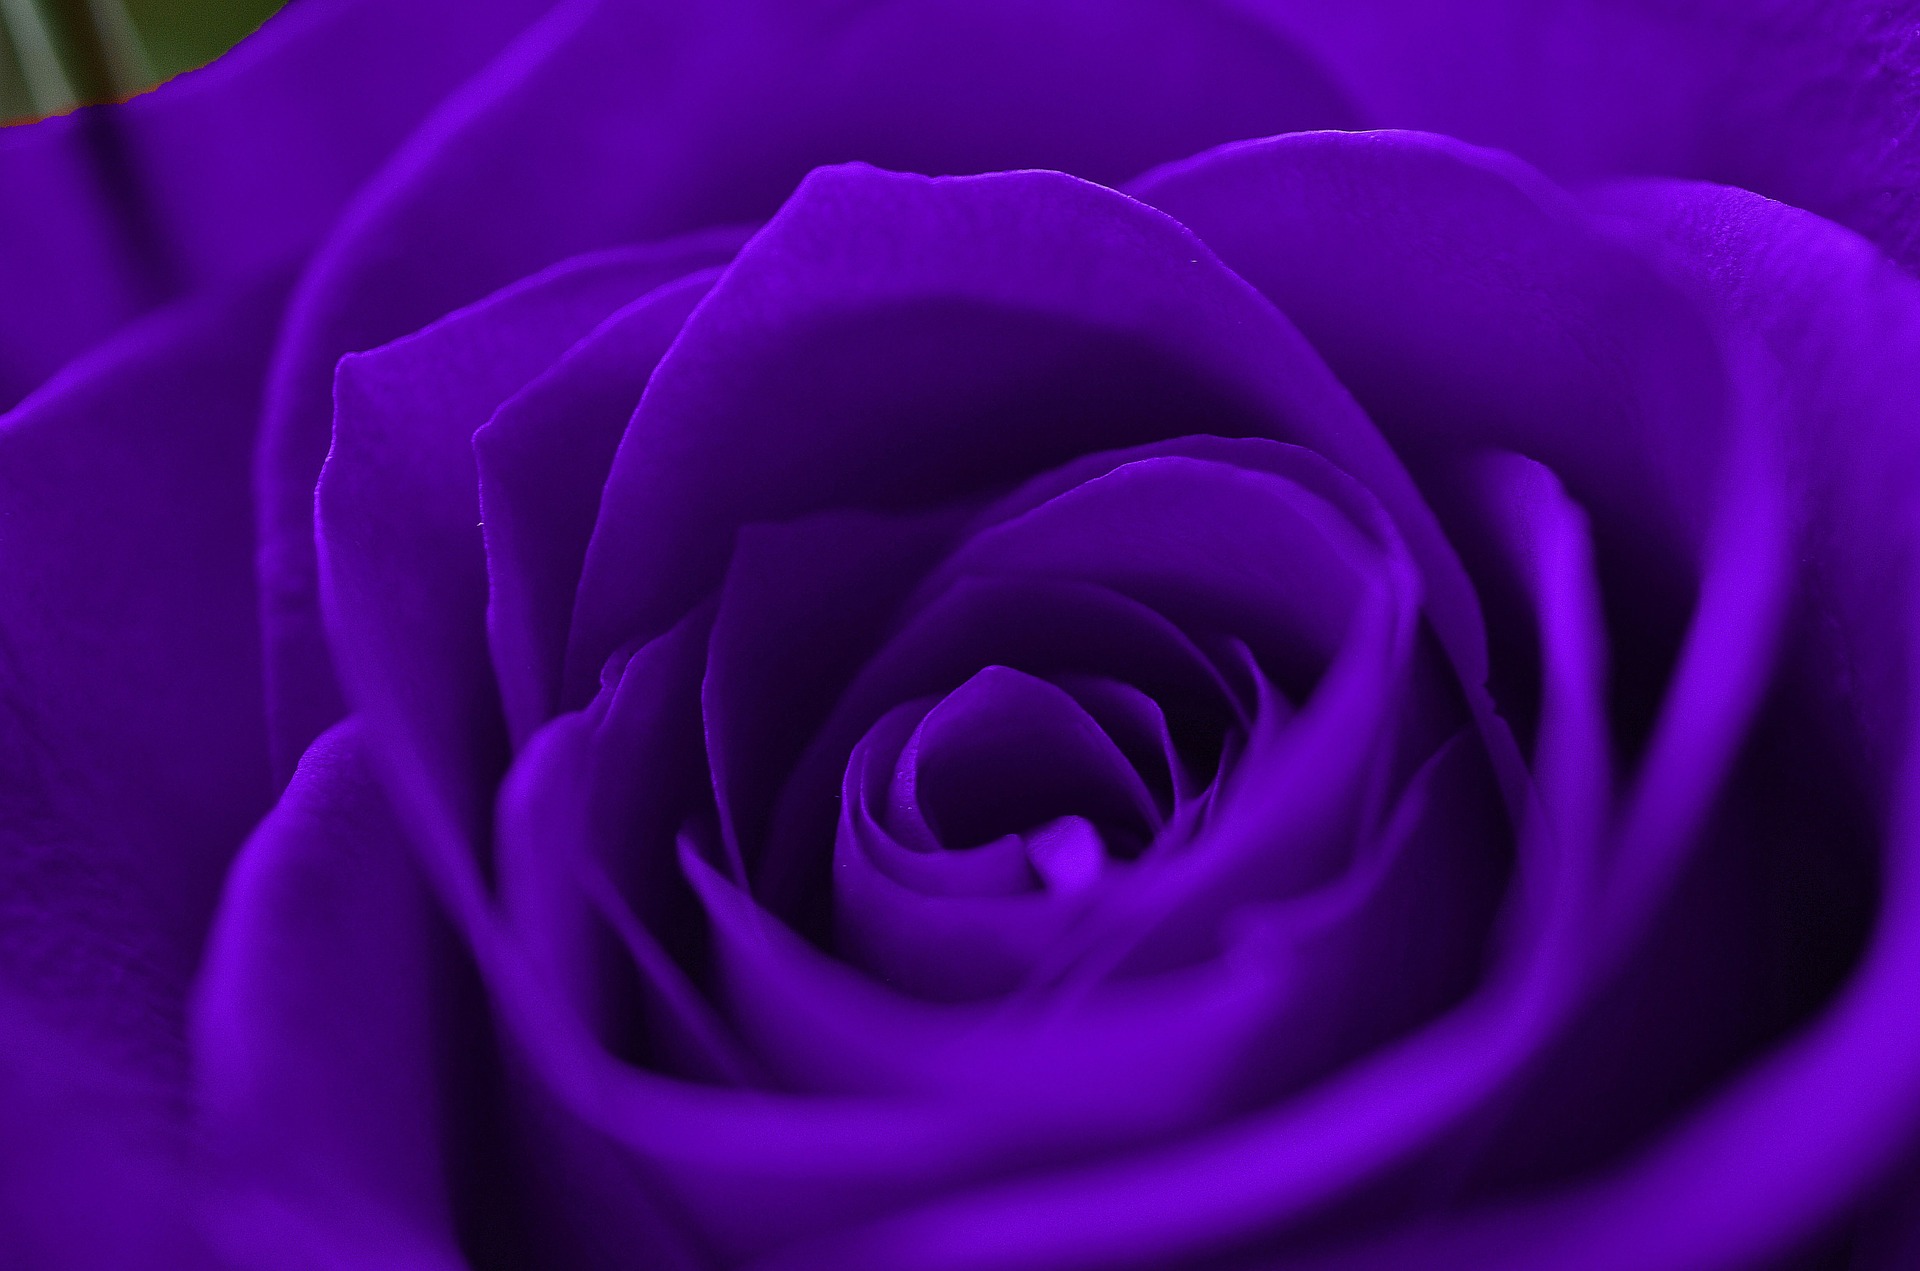 Purple Rose Wallpaper HD Full Pictures